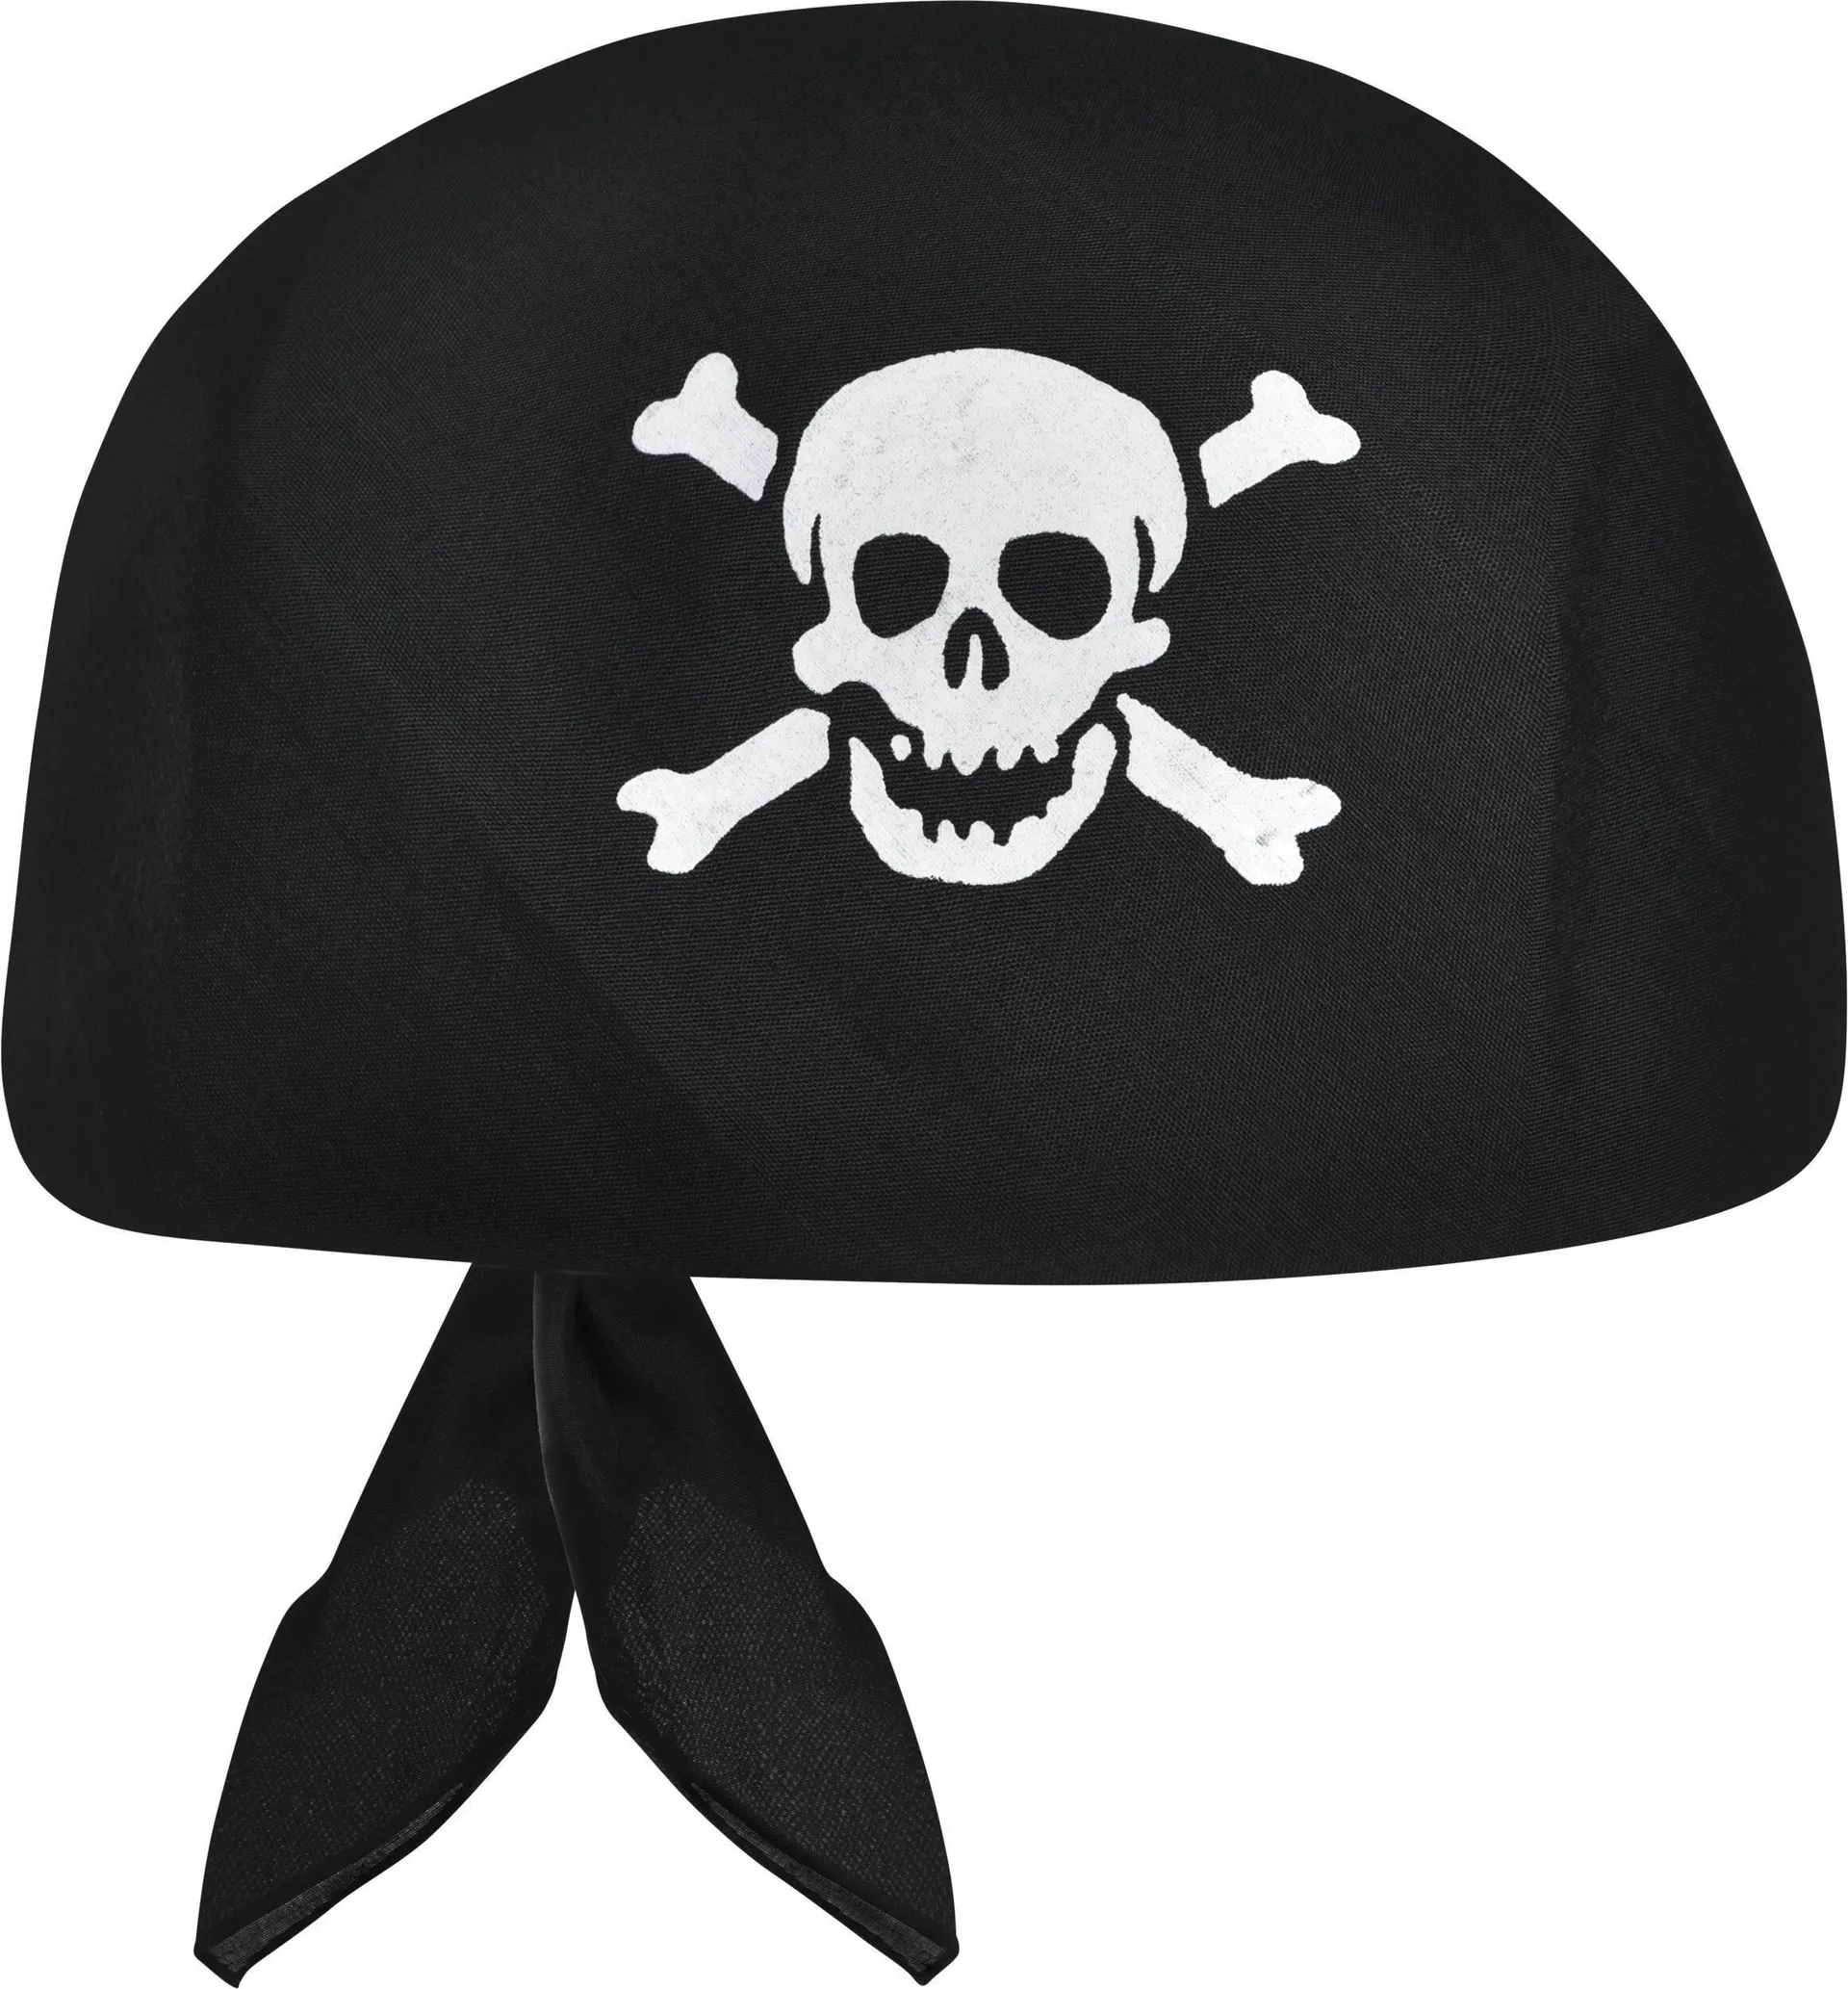 Pirate Skull Bandana Hat, Black/White, One Size, Wearable Costume Accessory for Halloween